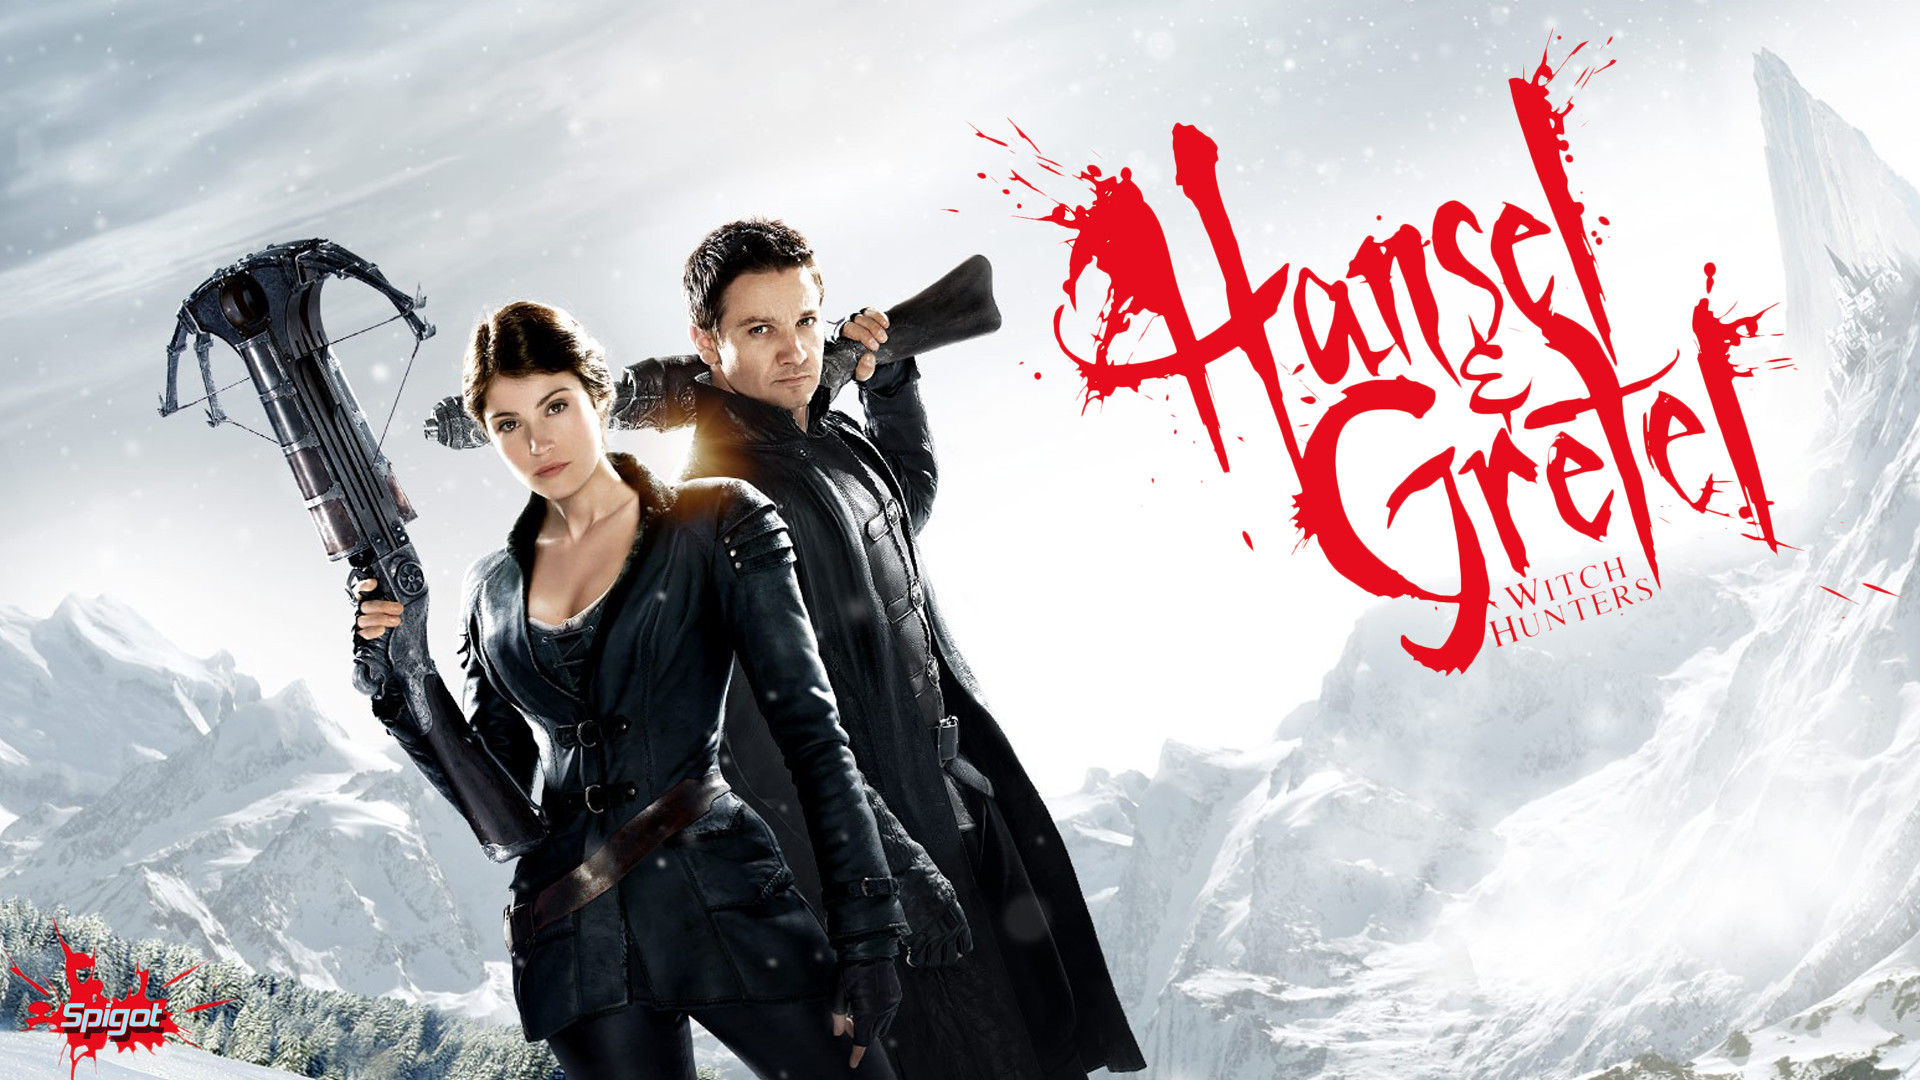 1920x1080 Hansel and Gretel Witch Hunters wallpapers movies wallpapers hot wallpapers  cool wallpapers